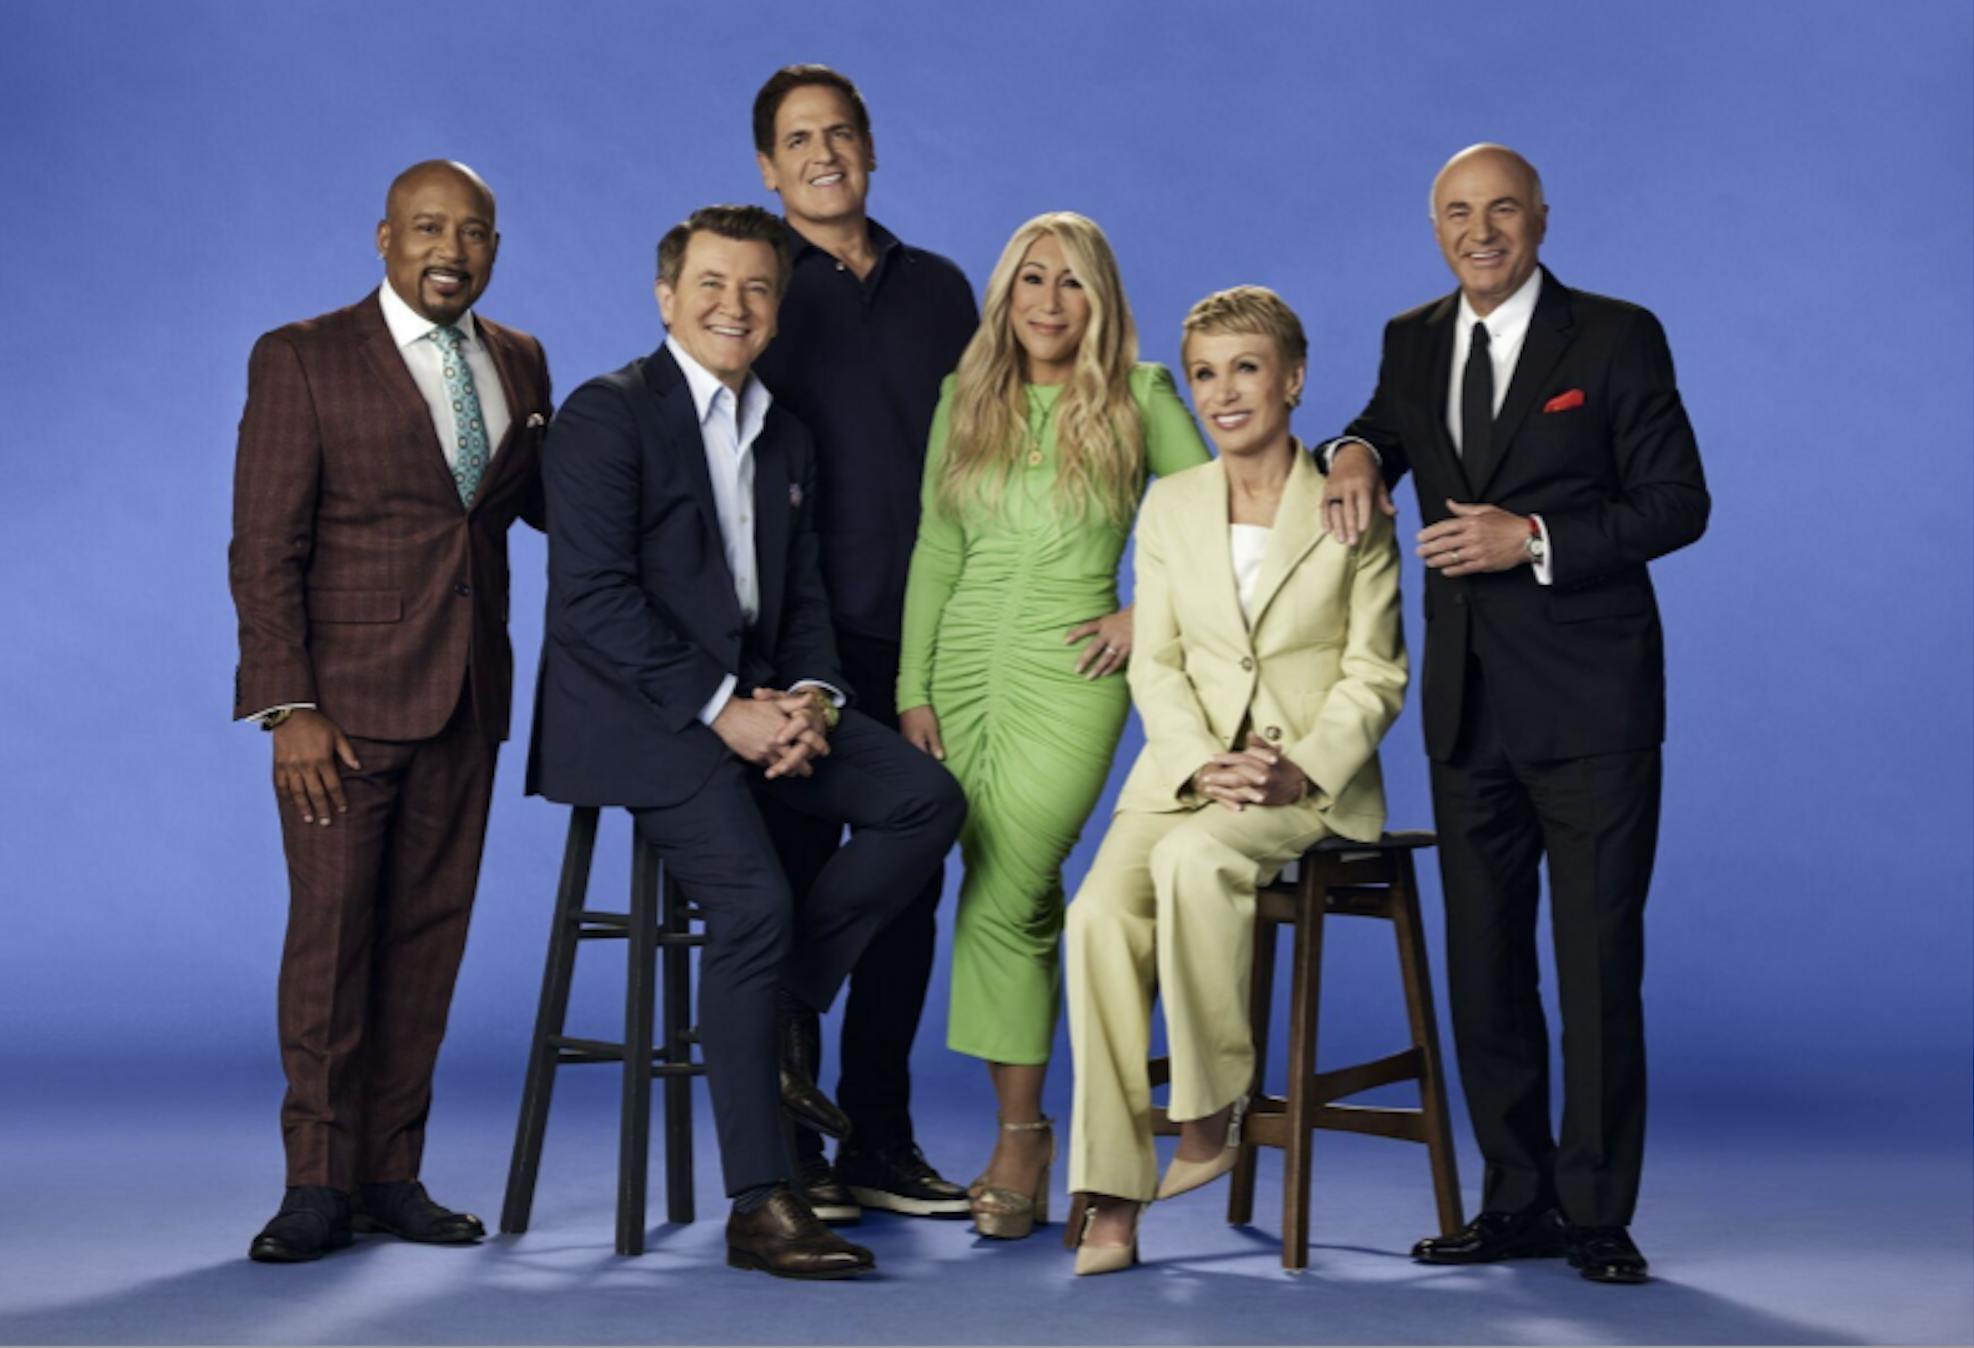 ABC-TV’S SHARK TANK WILL CAST ITS NET IN VIRGINIA FOR THE FIRST TIME